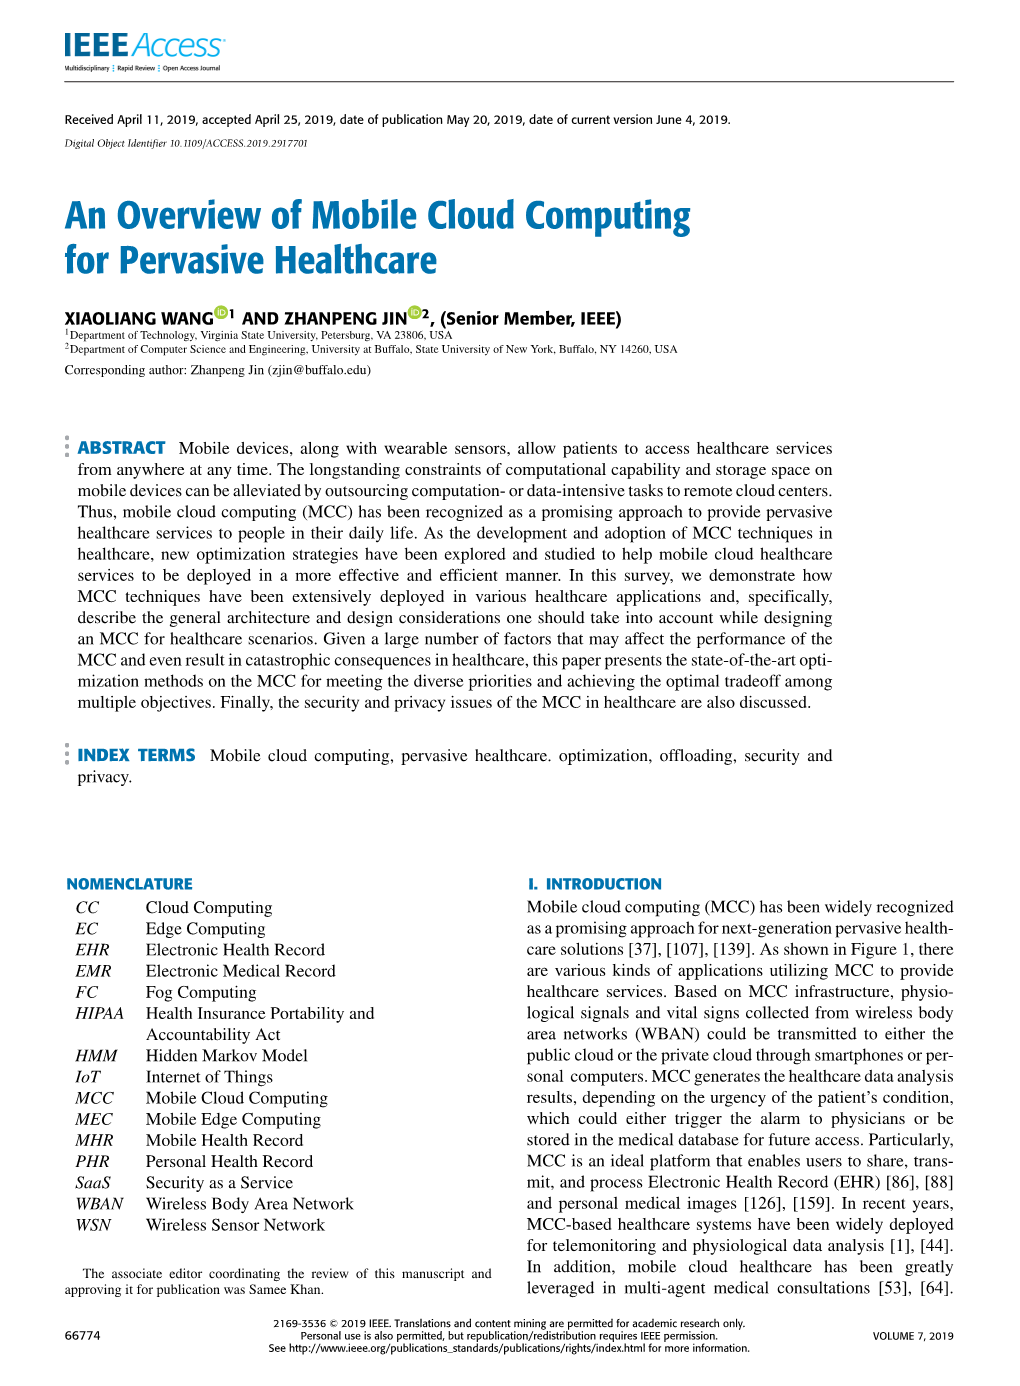 An Overview of Mobile Cloud Computing for Pervasive Healthcare